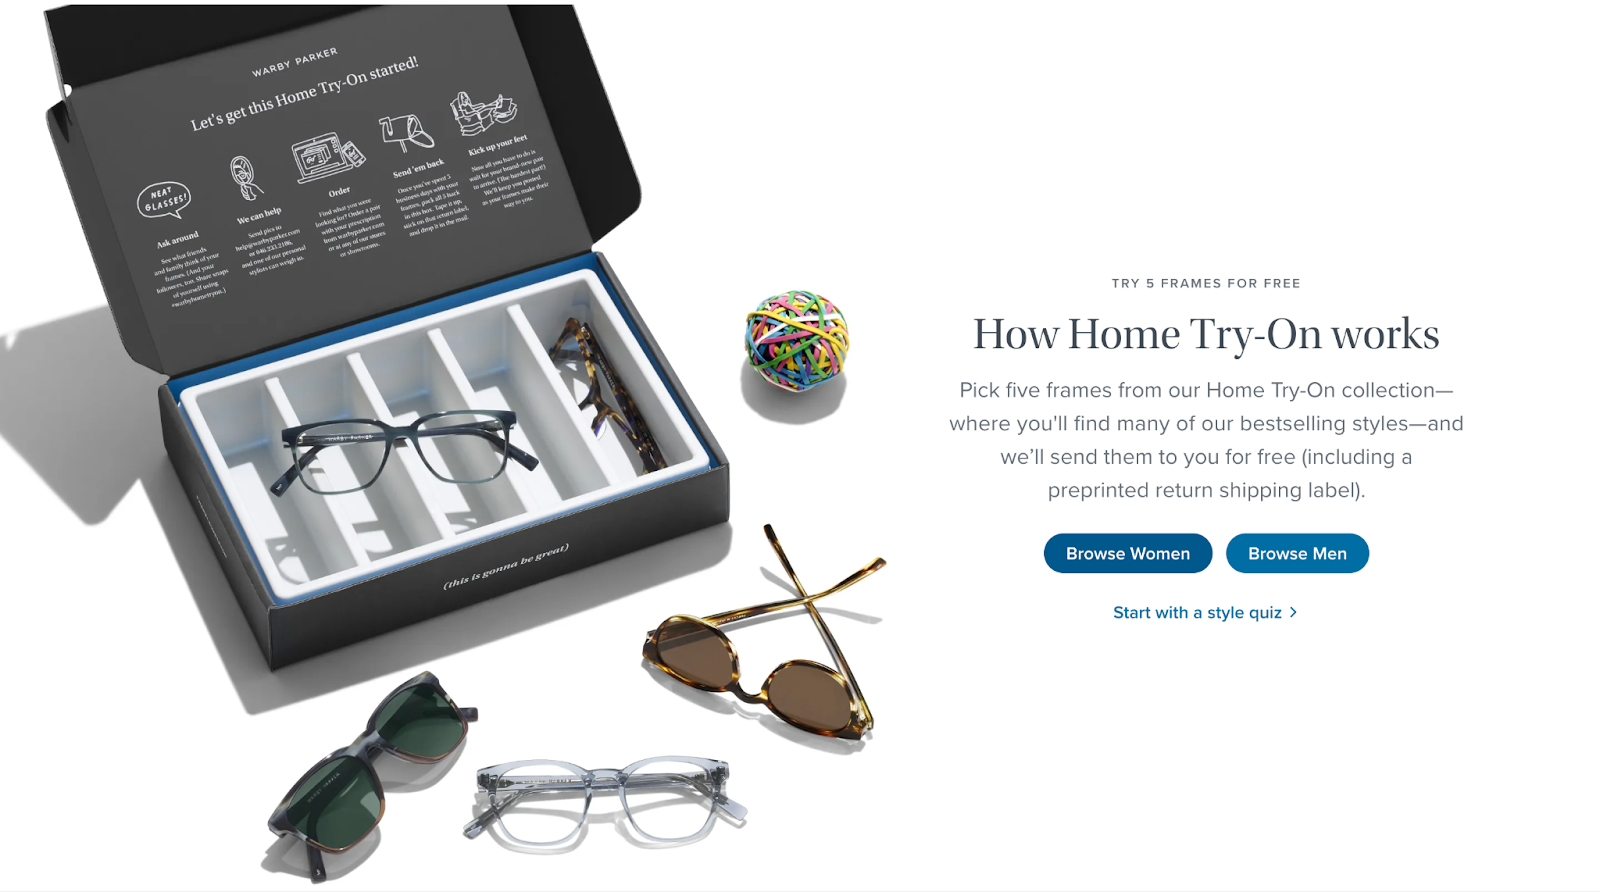 Screenshot of Warby Parker’s customer acquisition offer